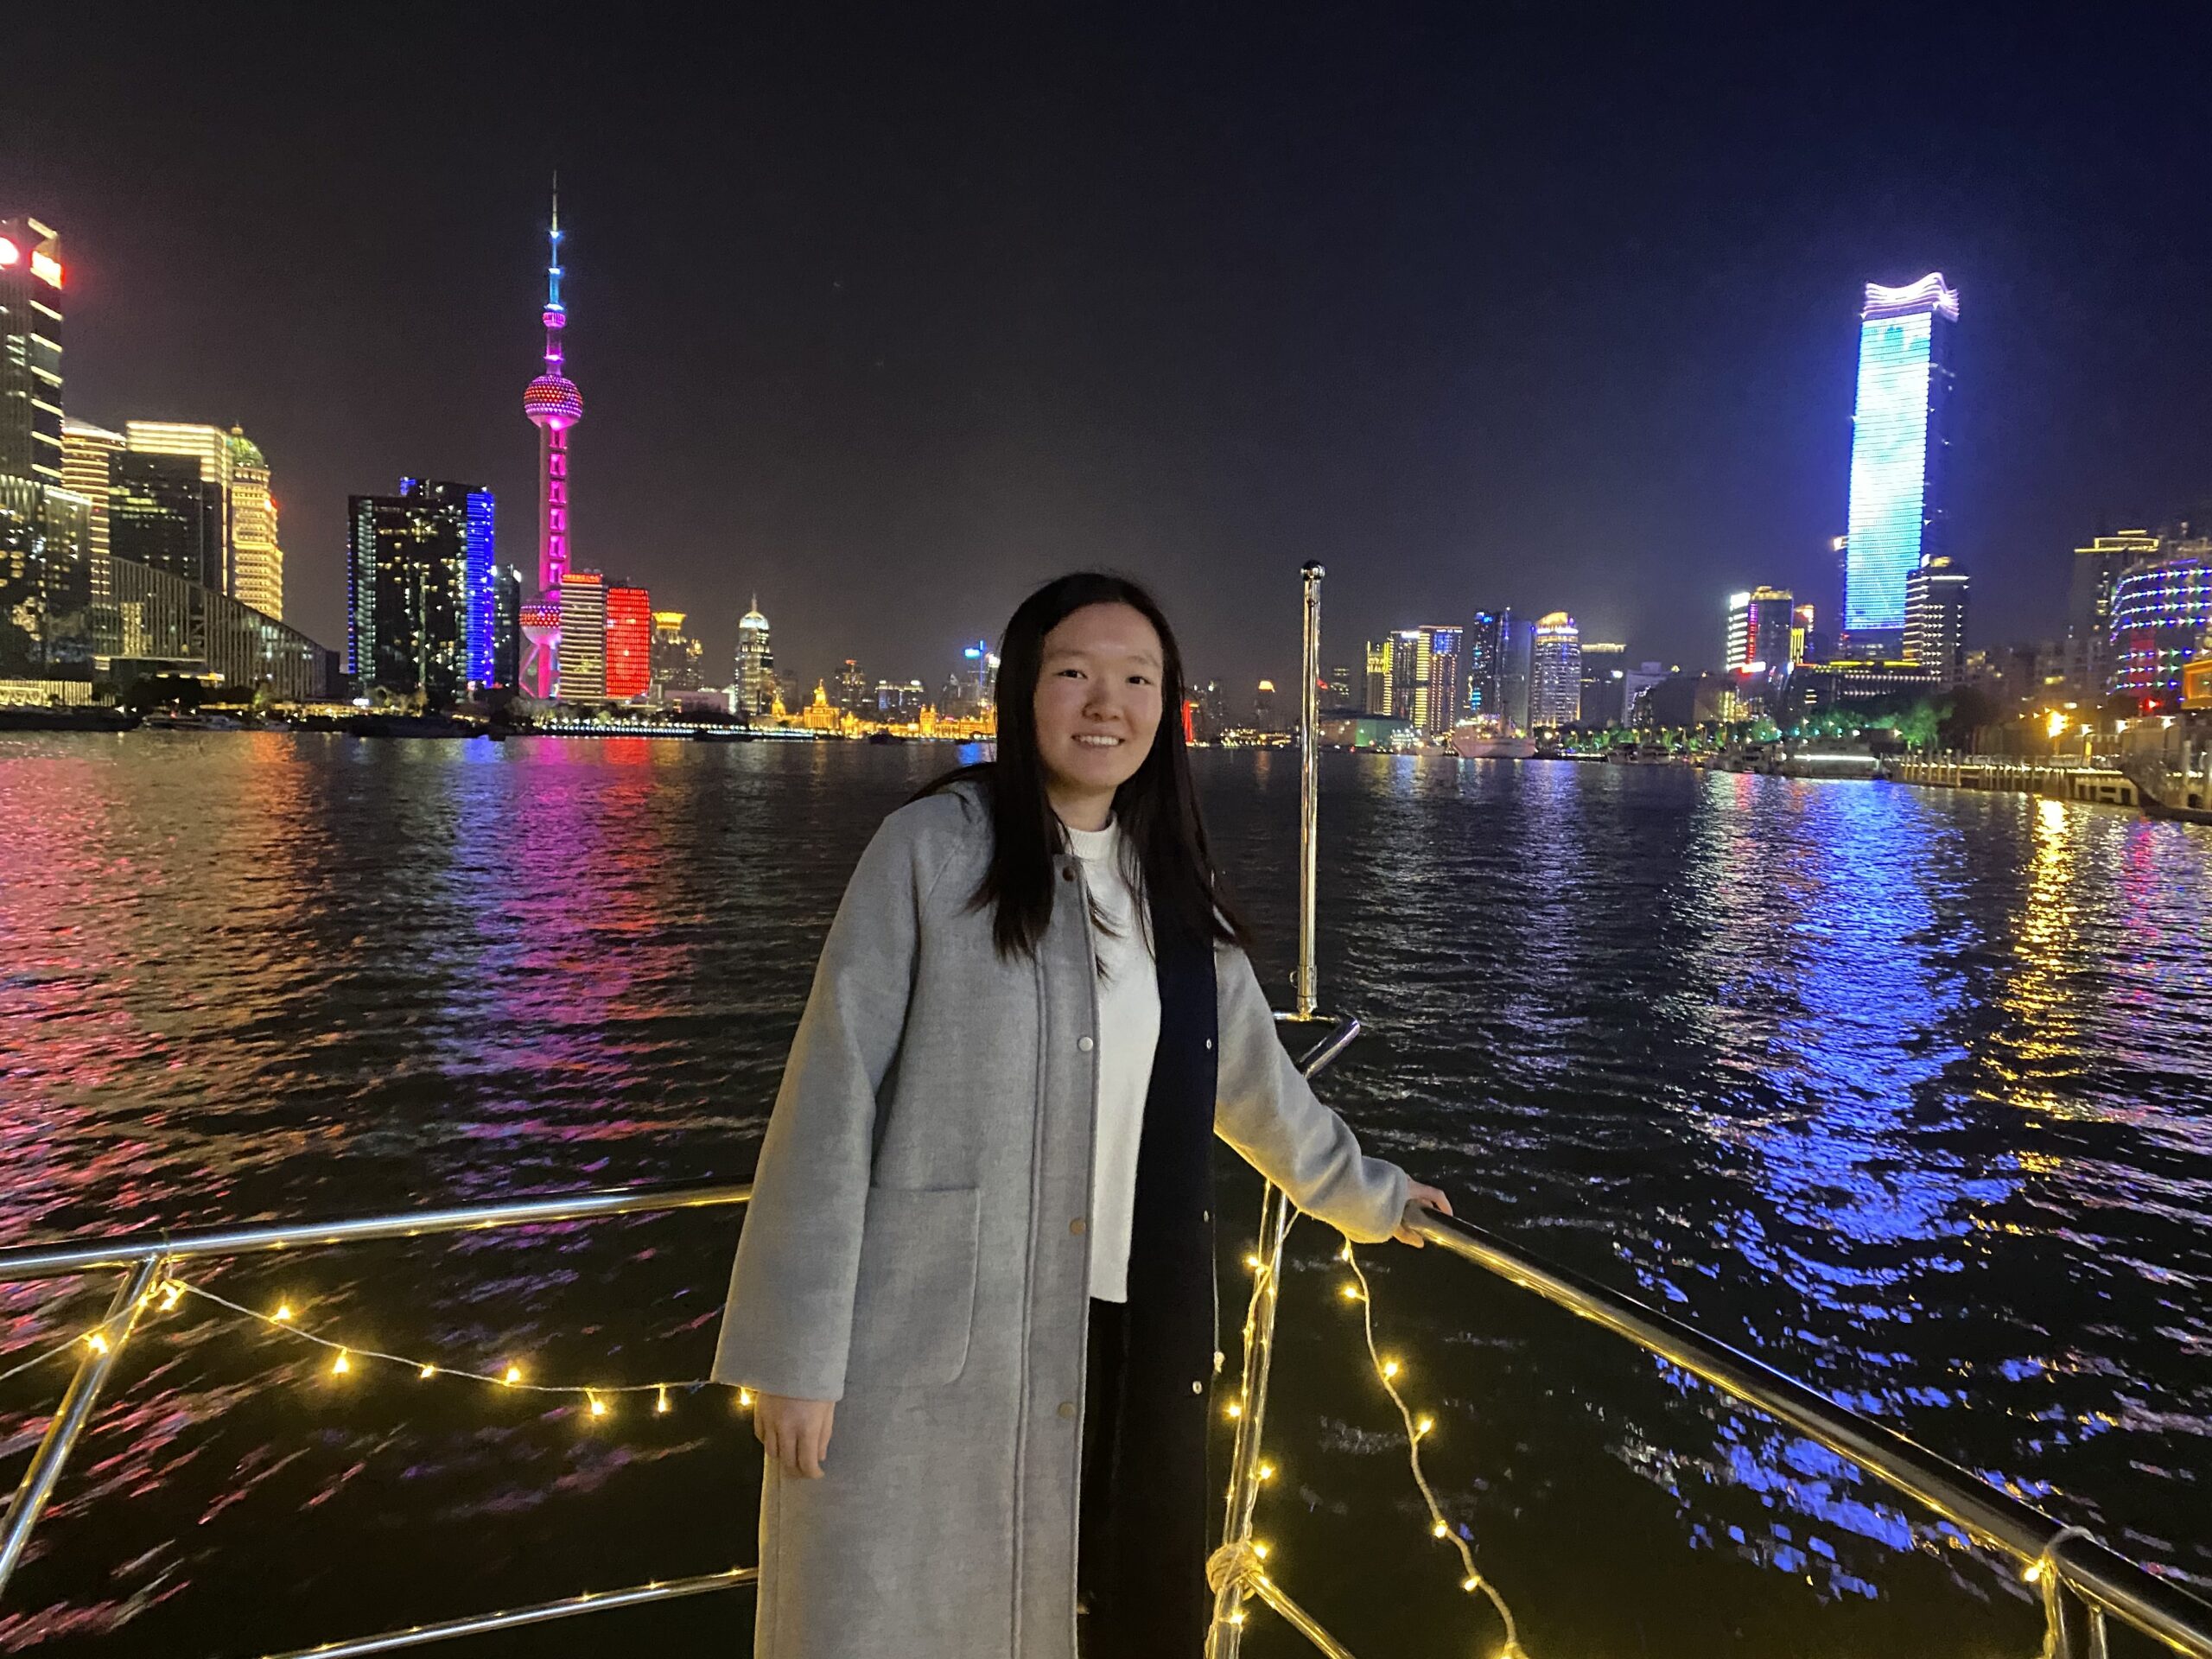 Me celebrating my friend's birthday on Huangpu River in front of Oriental Pearl Tower